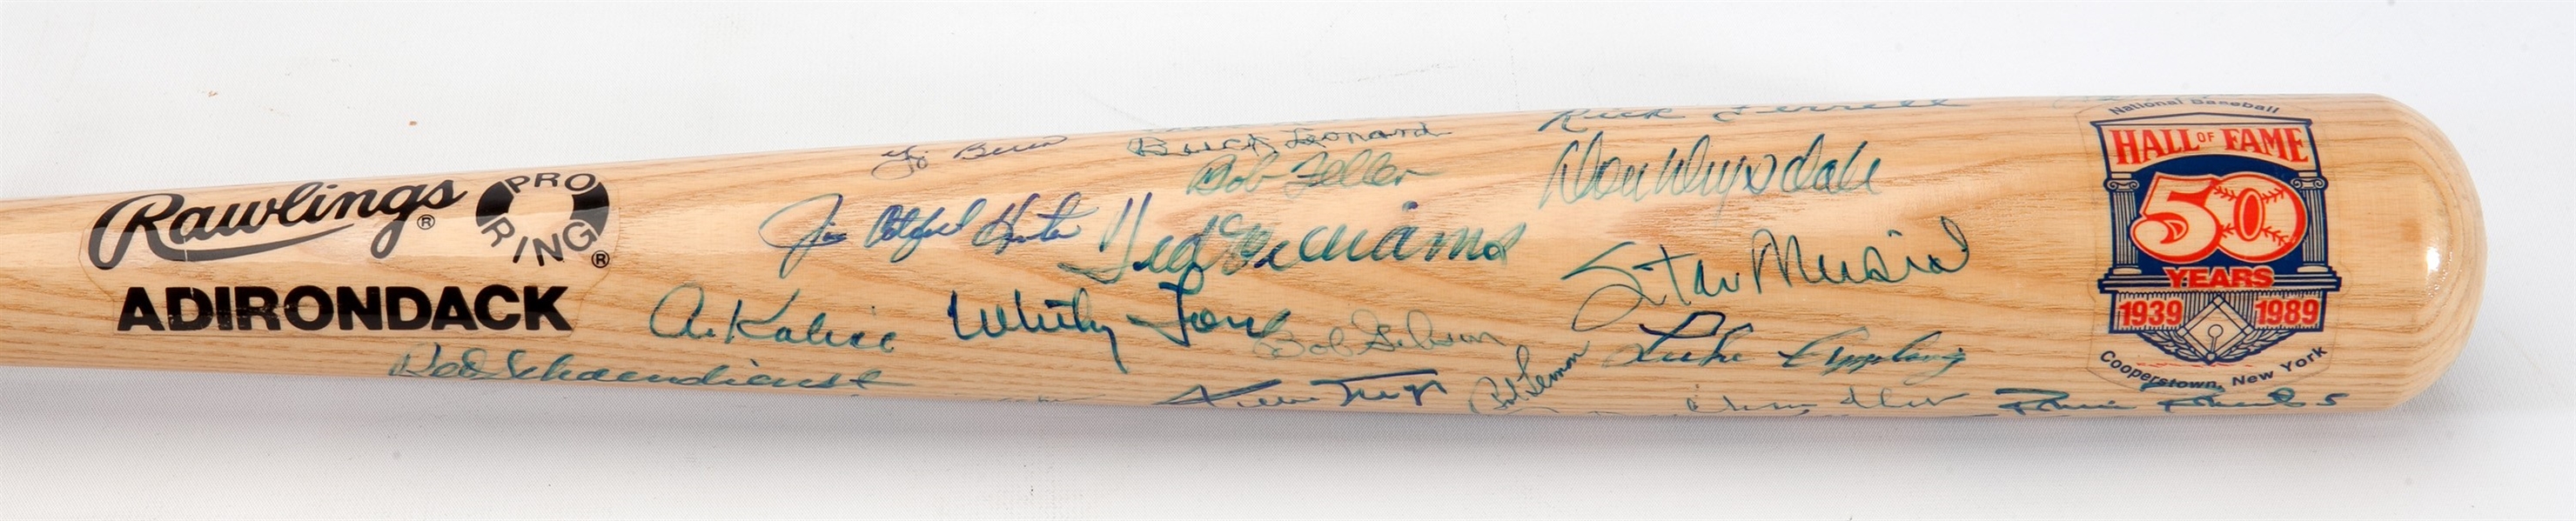 1939-89 HALL OF FAME 50TH ANNIVERSARY RAWLINGS BAT SIGNED BY (41) INCL. TED WILLIAMS & WILLIE MAYS